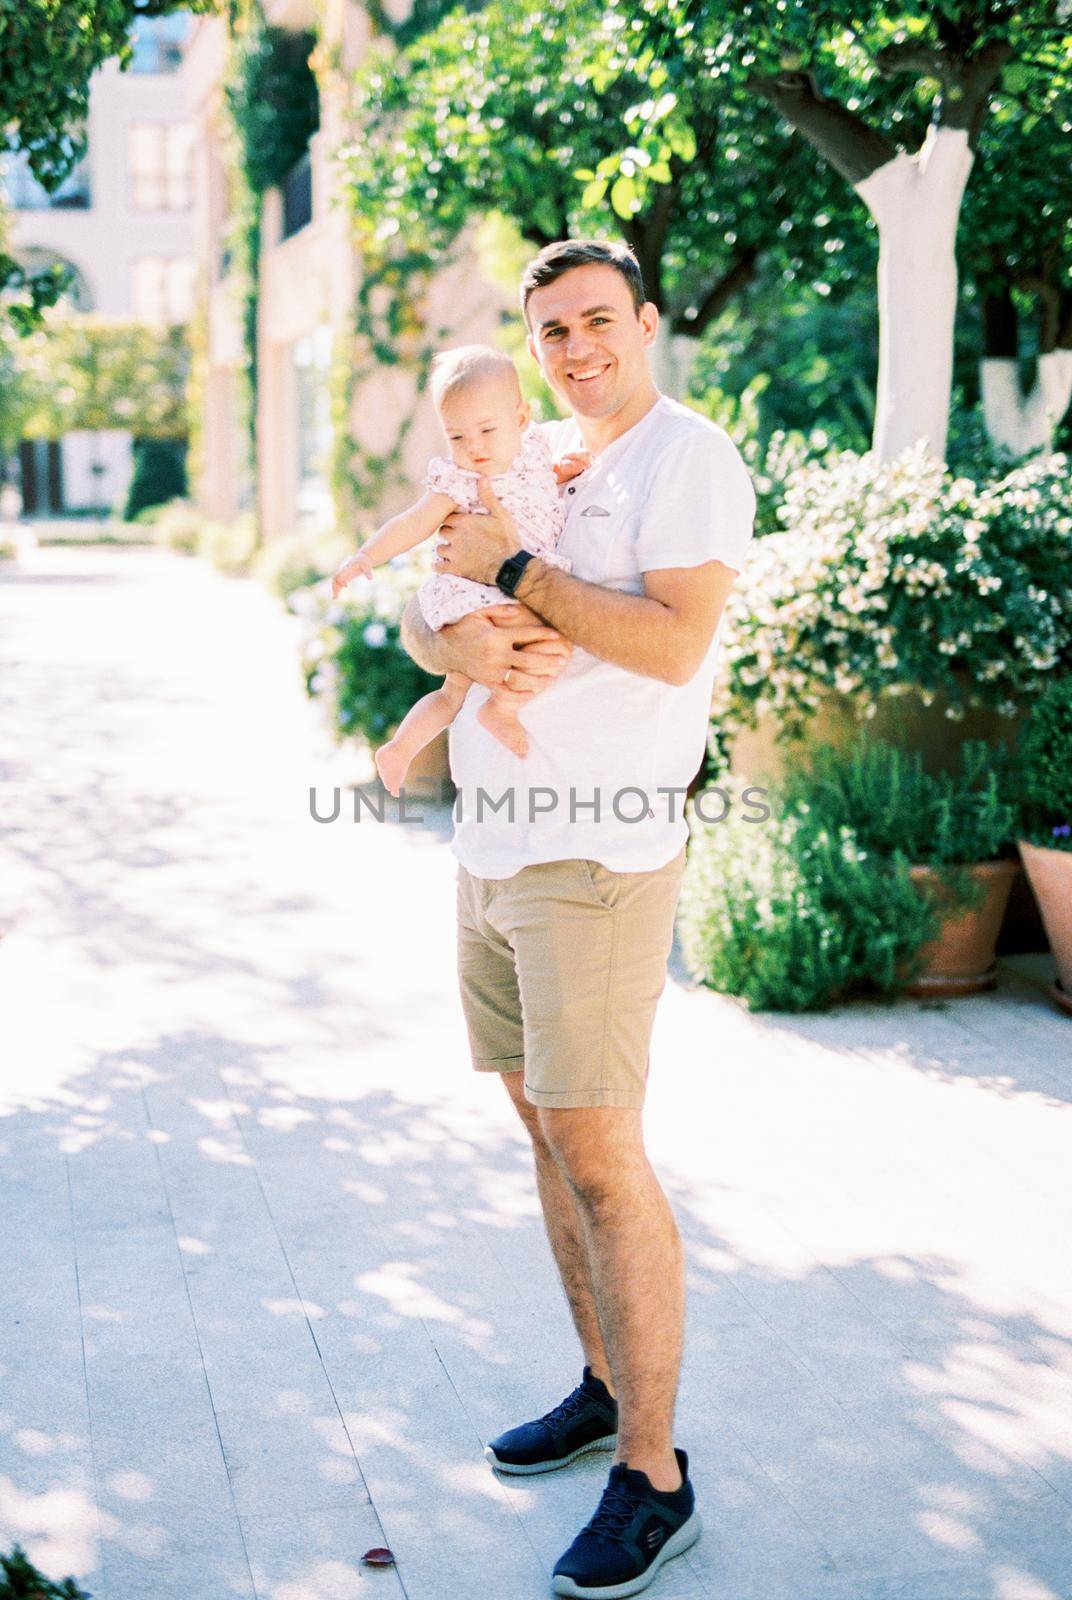 Smiling dad with a little girl in his arms stands on the street near flower pots. High quality photo